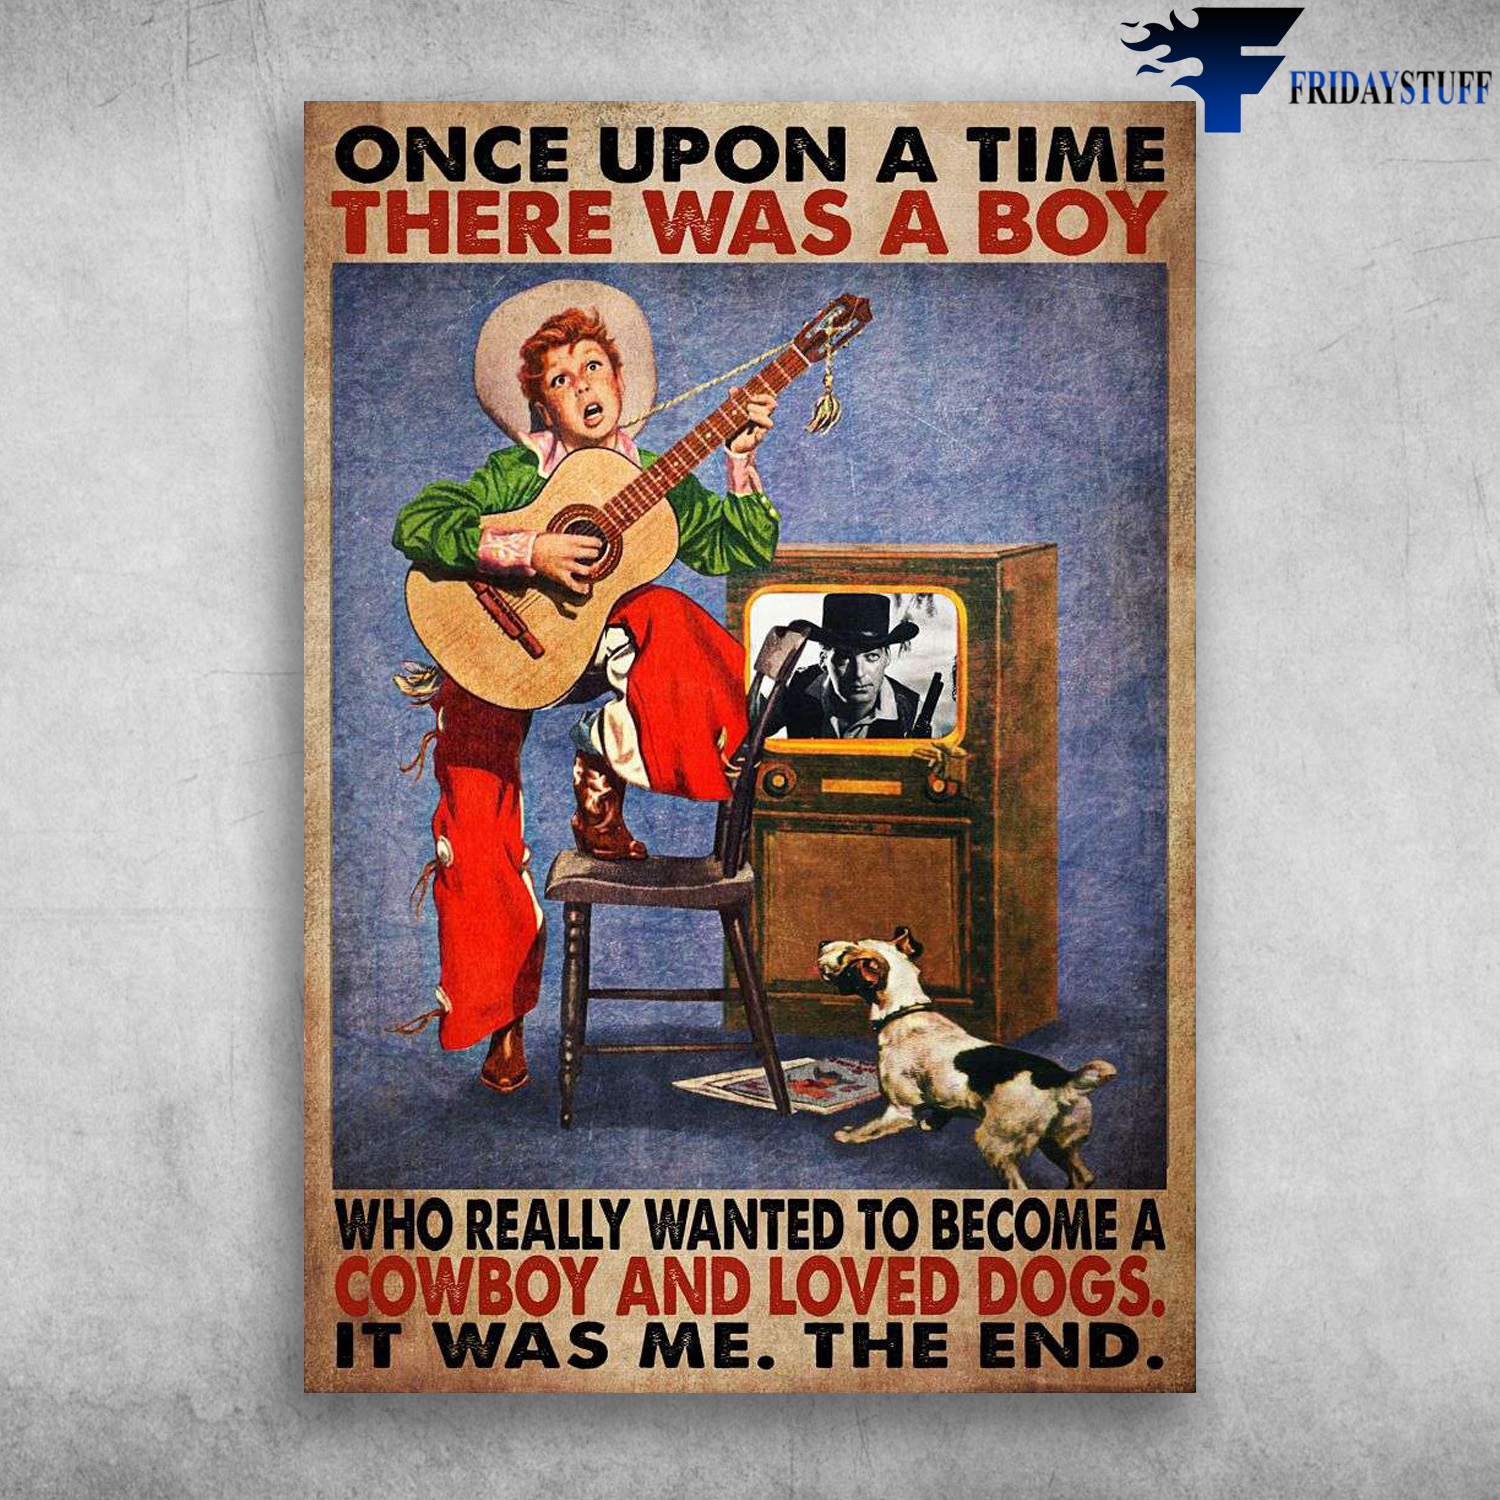 Cowboy And Dogs - Once Upon A Time, There Was A Boy, Who Really Wanted To Become, A Cowboy And Loved Dogs, It Was Me, The End